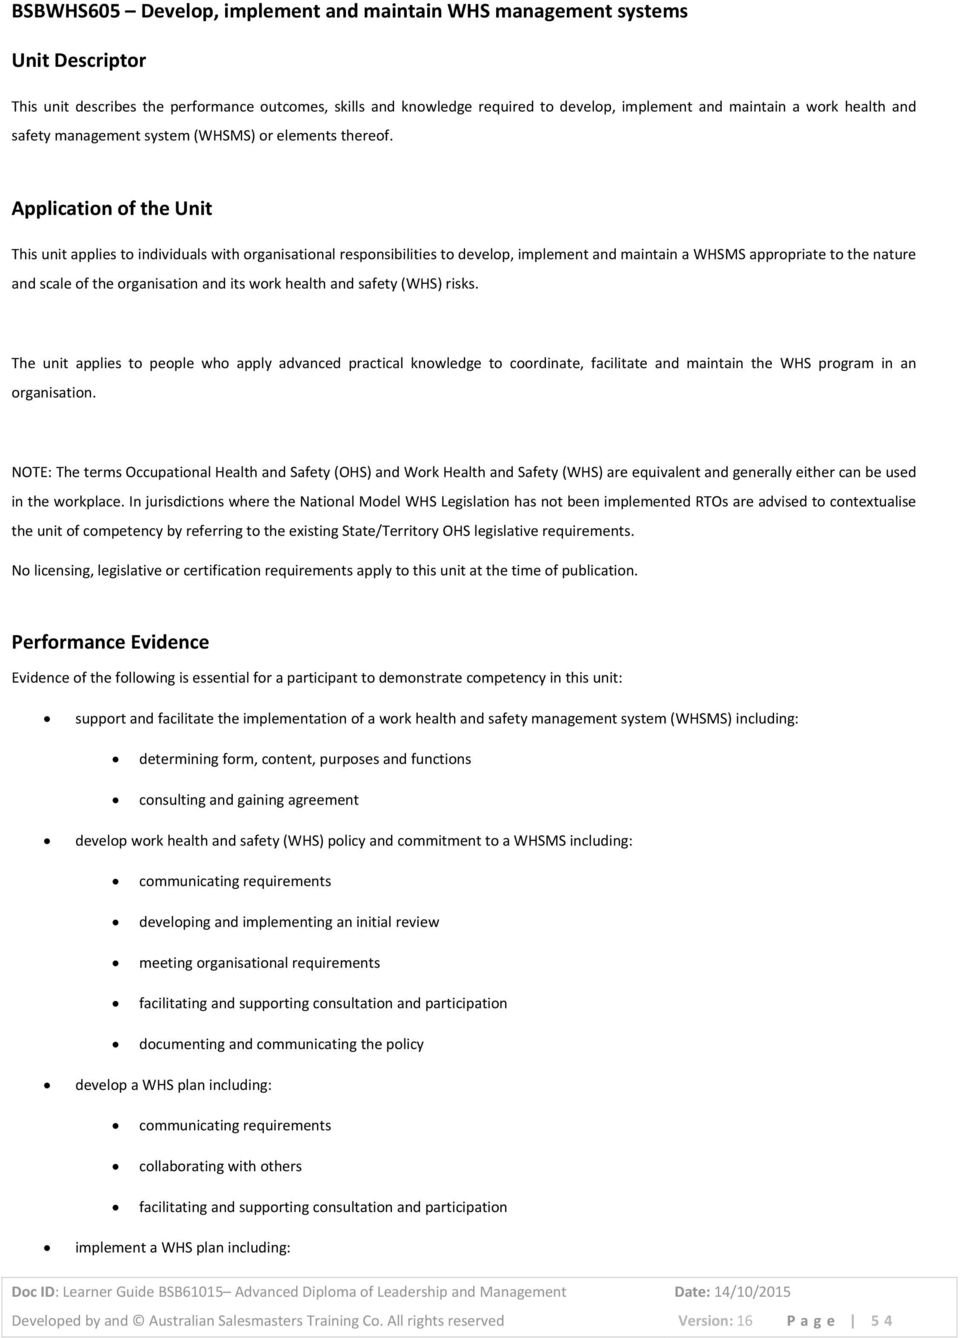 Application of the Unit This unit applies to individuals with organisational responsibilities to develop, implement and maintain a WHSMS appropriate to the nature and scale of the organisation and